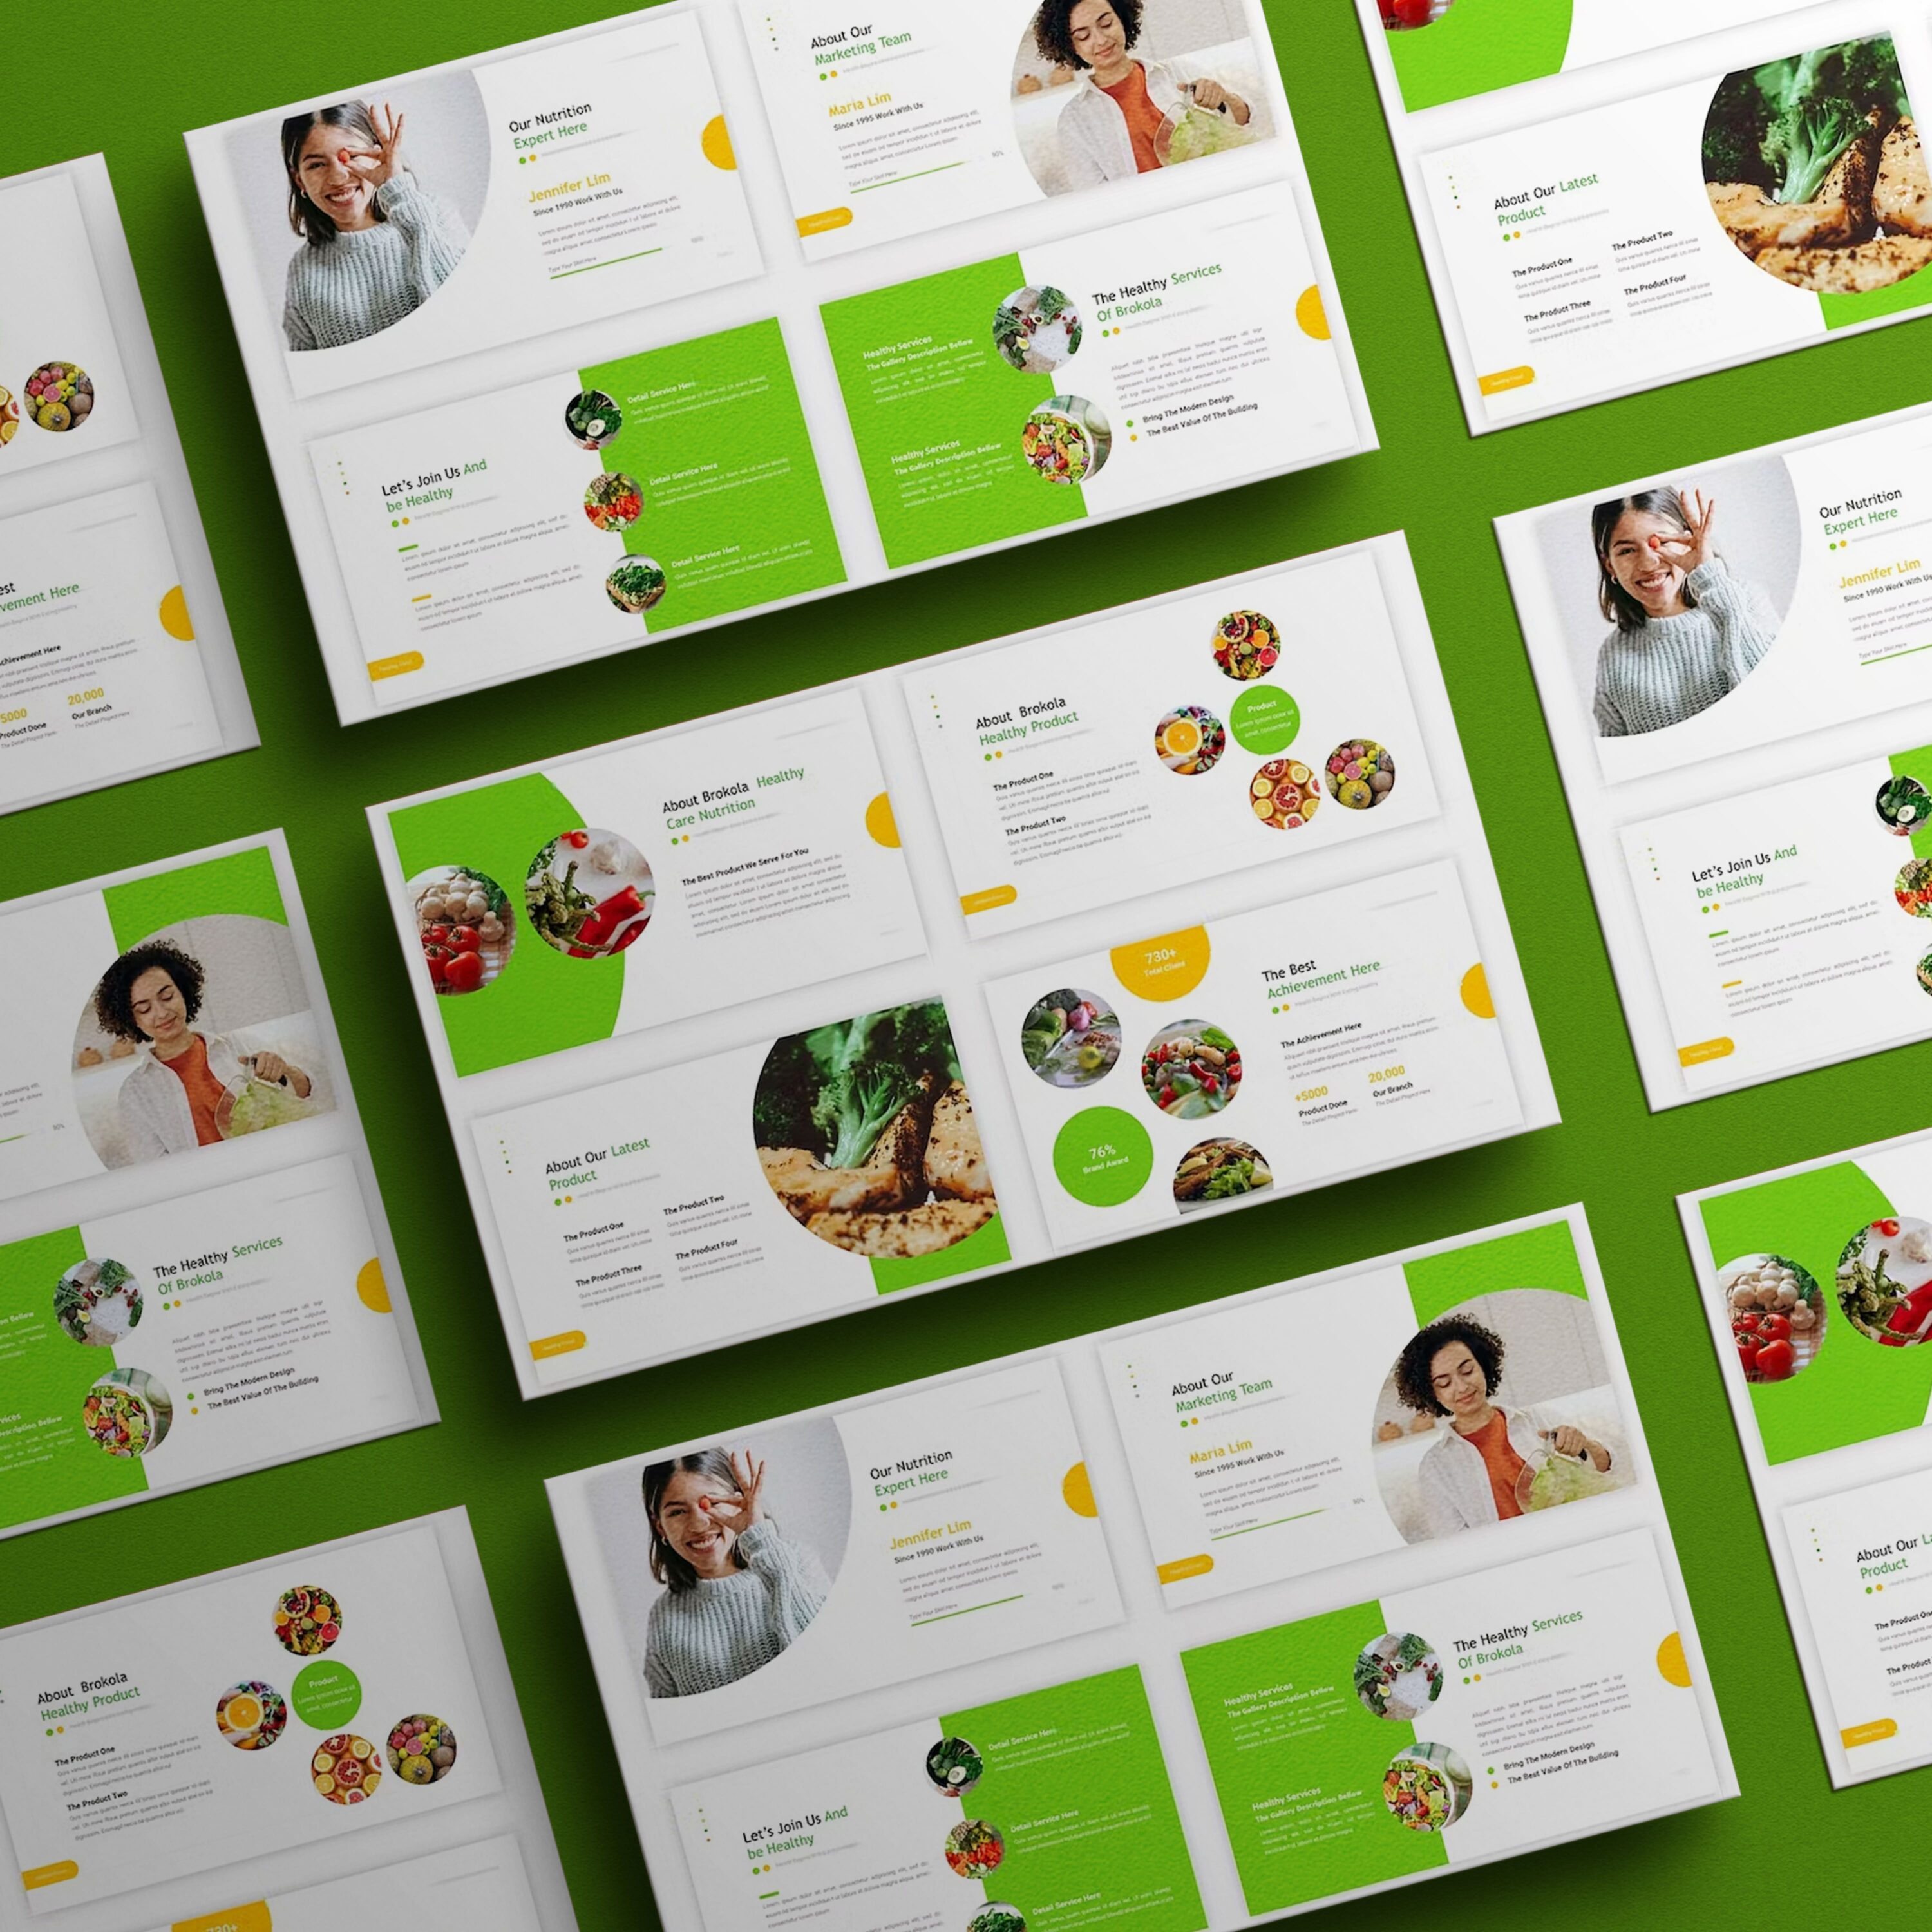 Brokola Healthy Food PowerPoint Template from CocoTemplates.